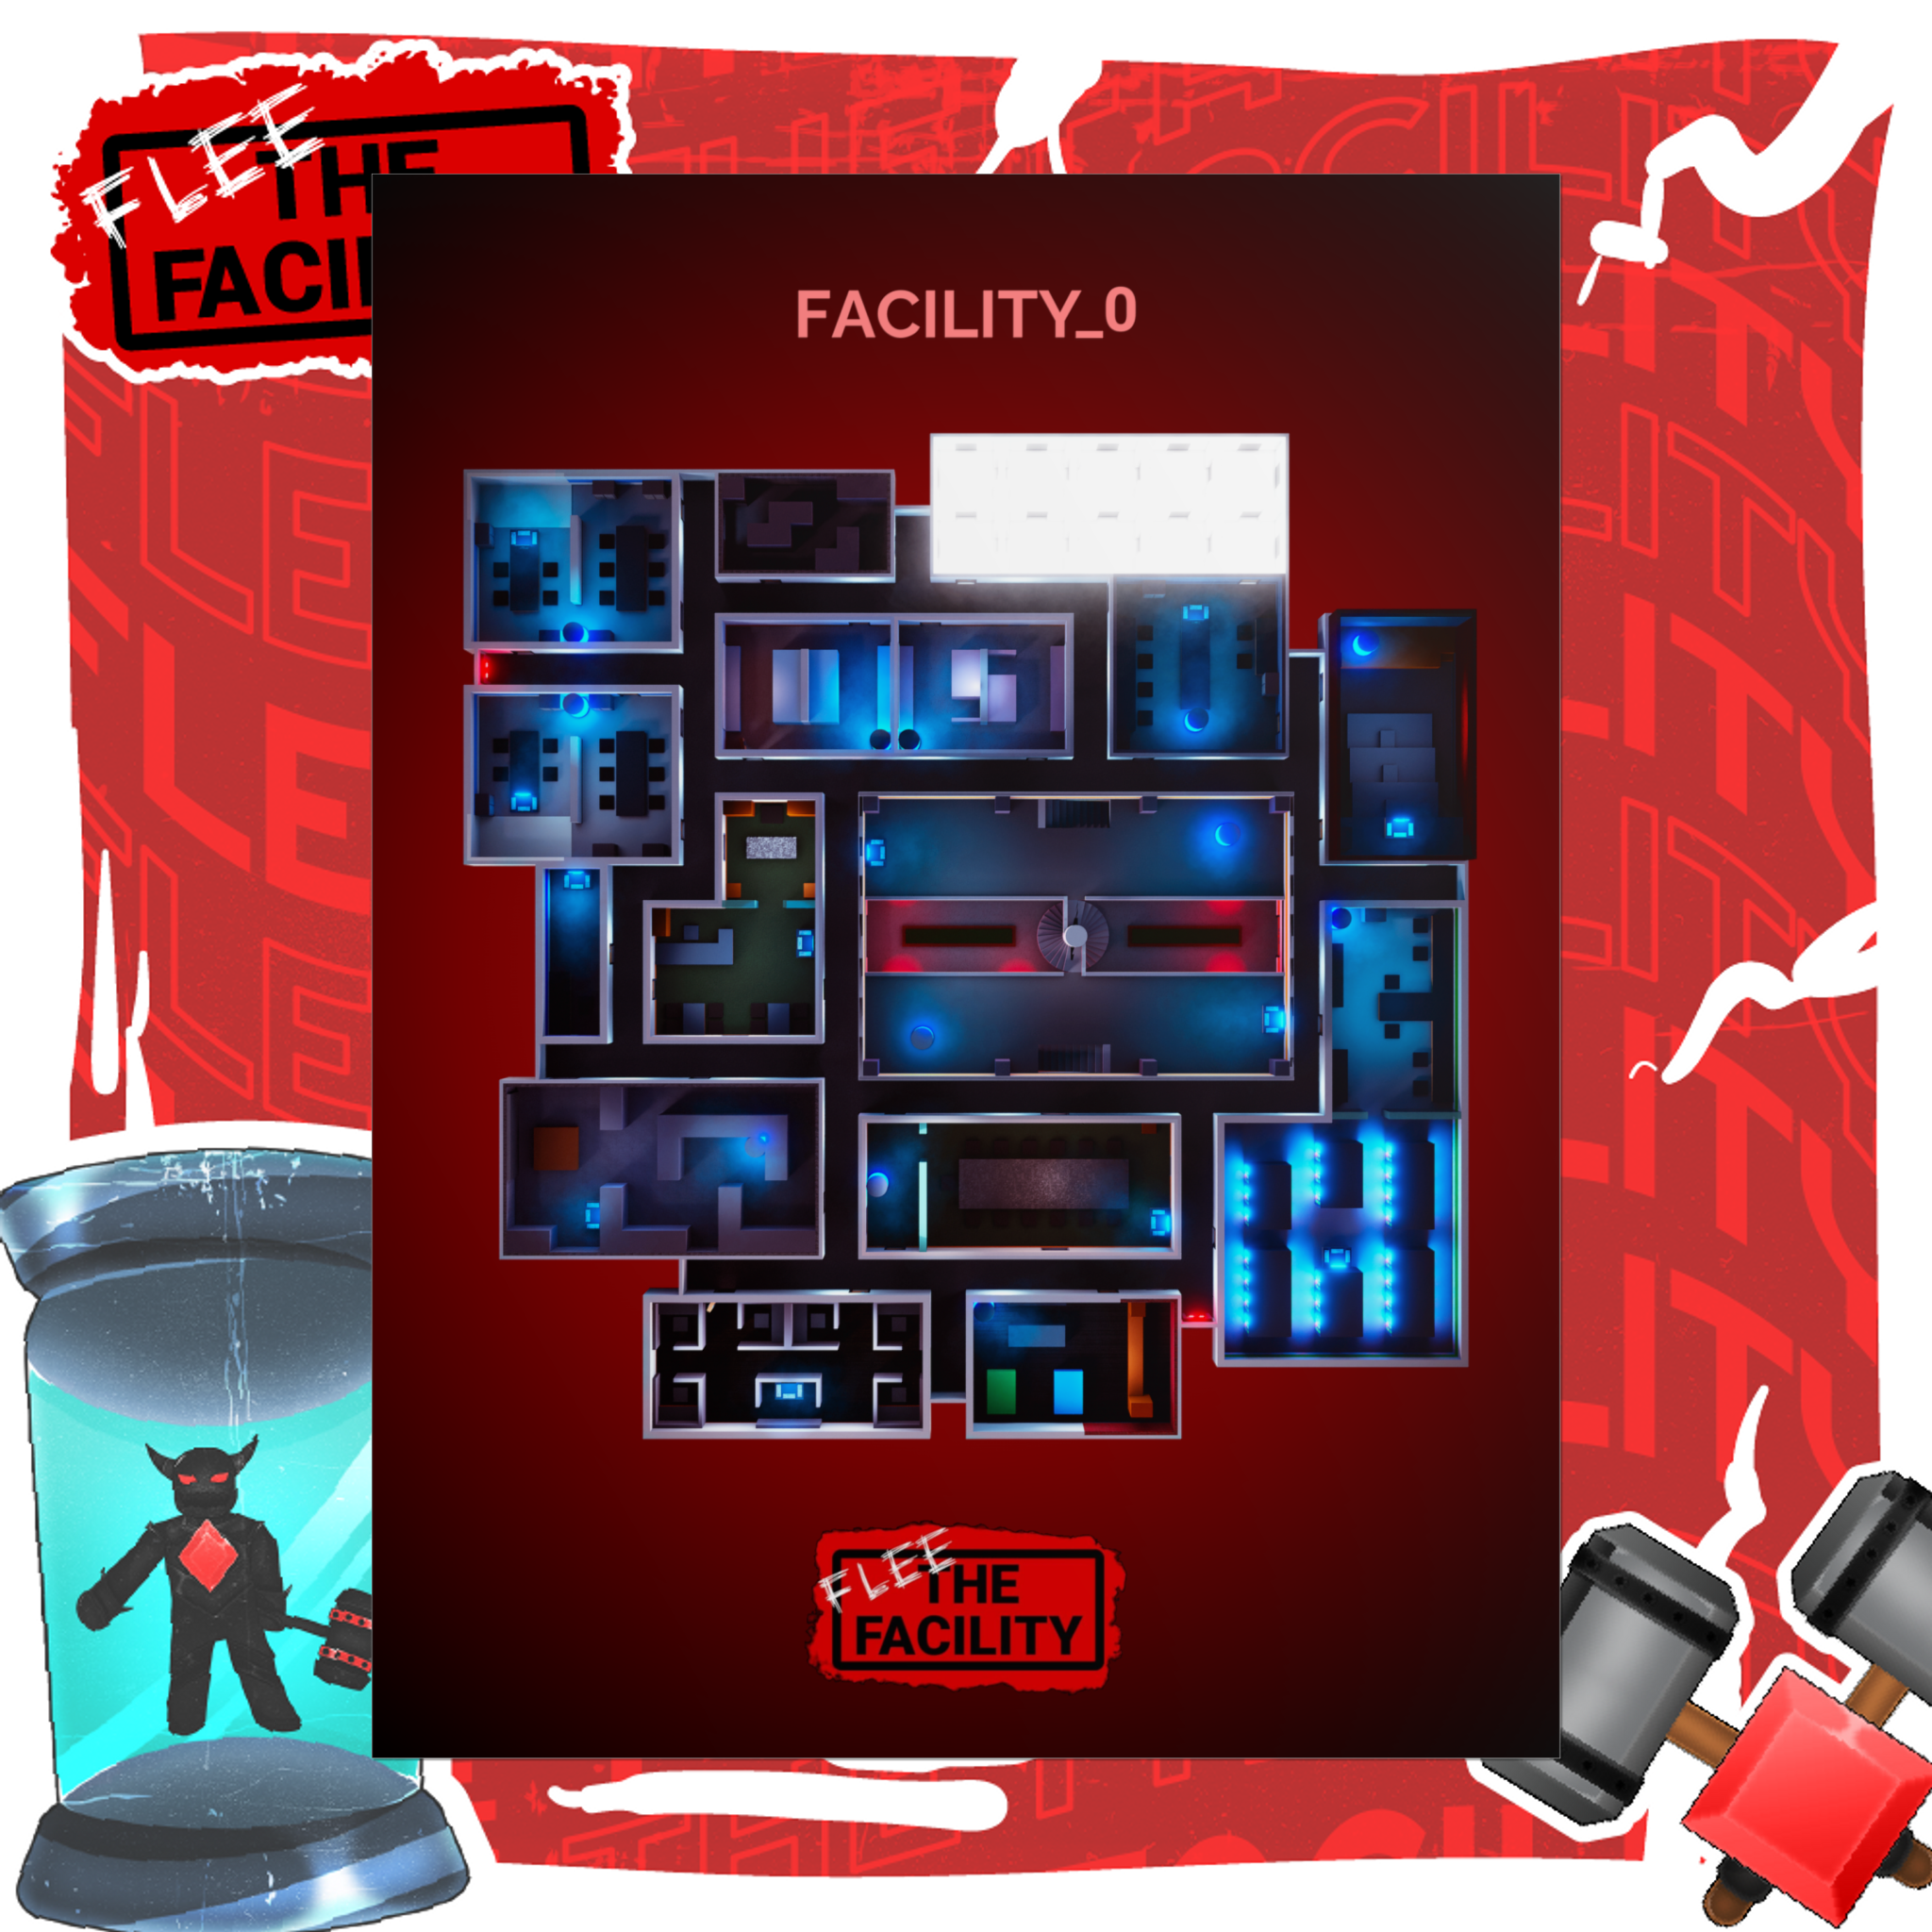 Flee The Facility - Facility_0 Poster